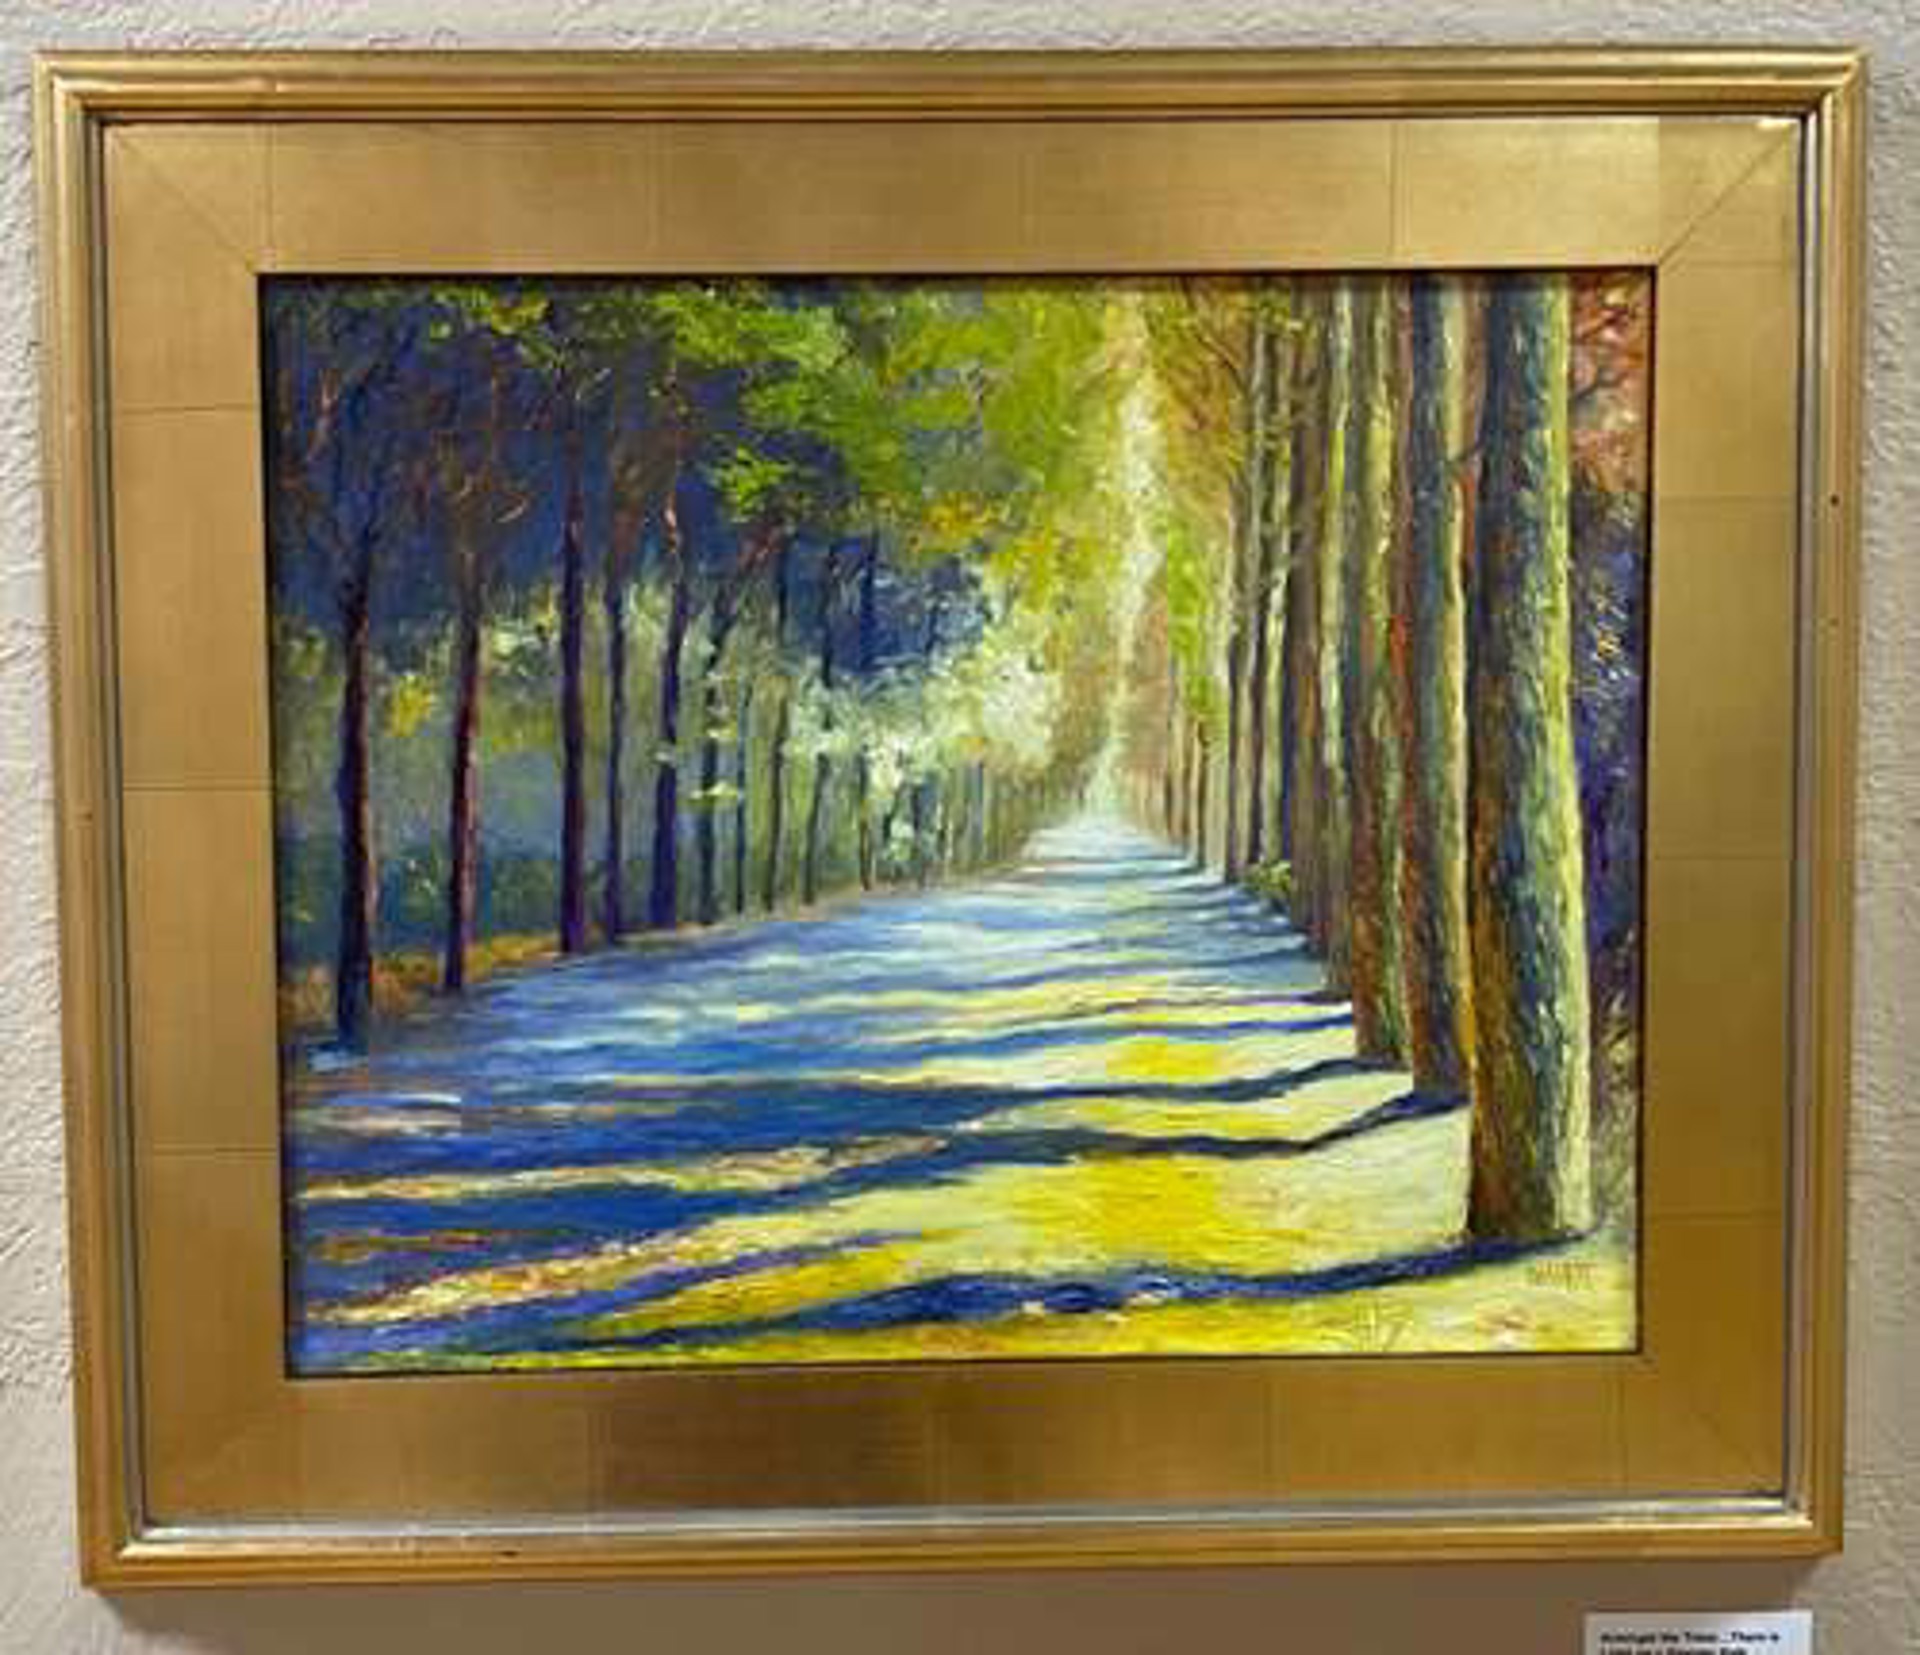 Light on a Straight Path by Cynthia Jewell Pollett